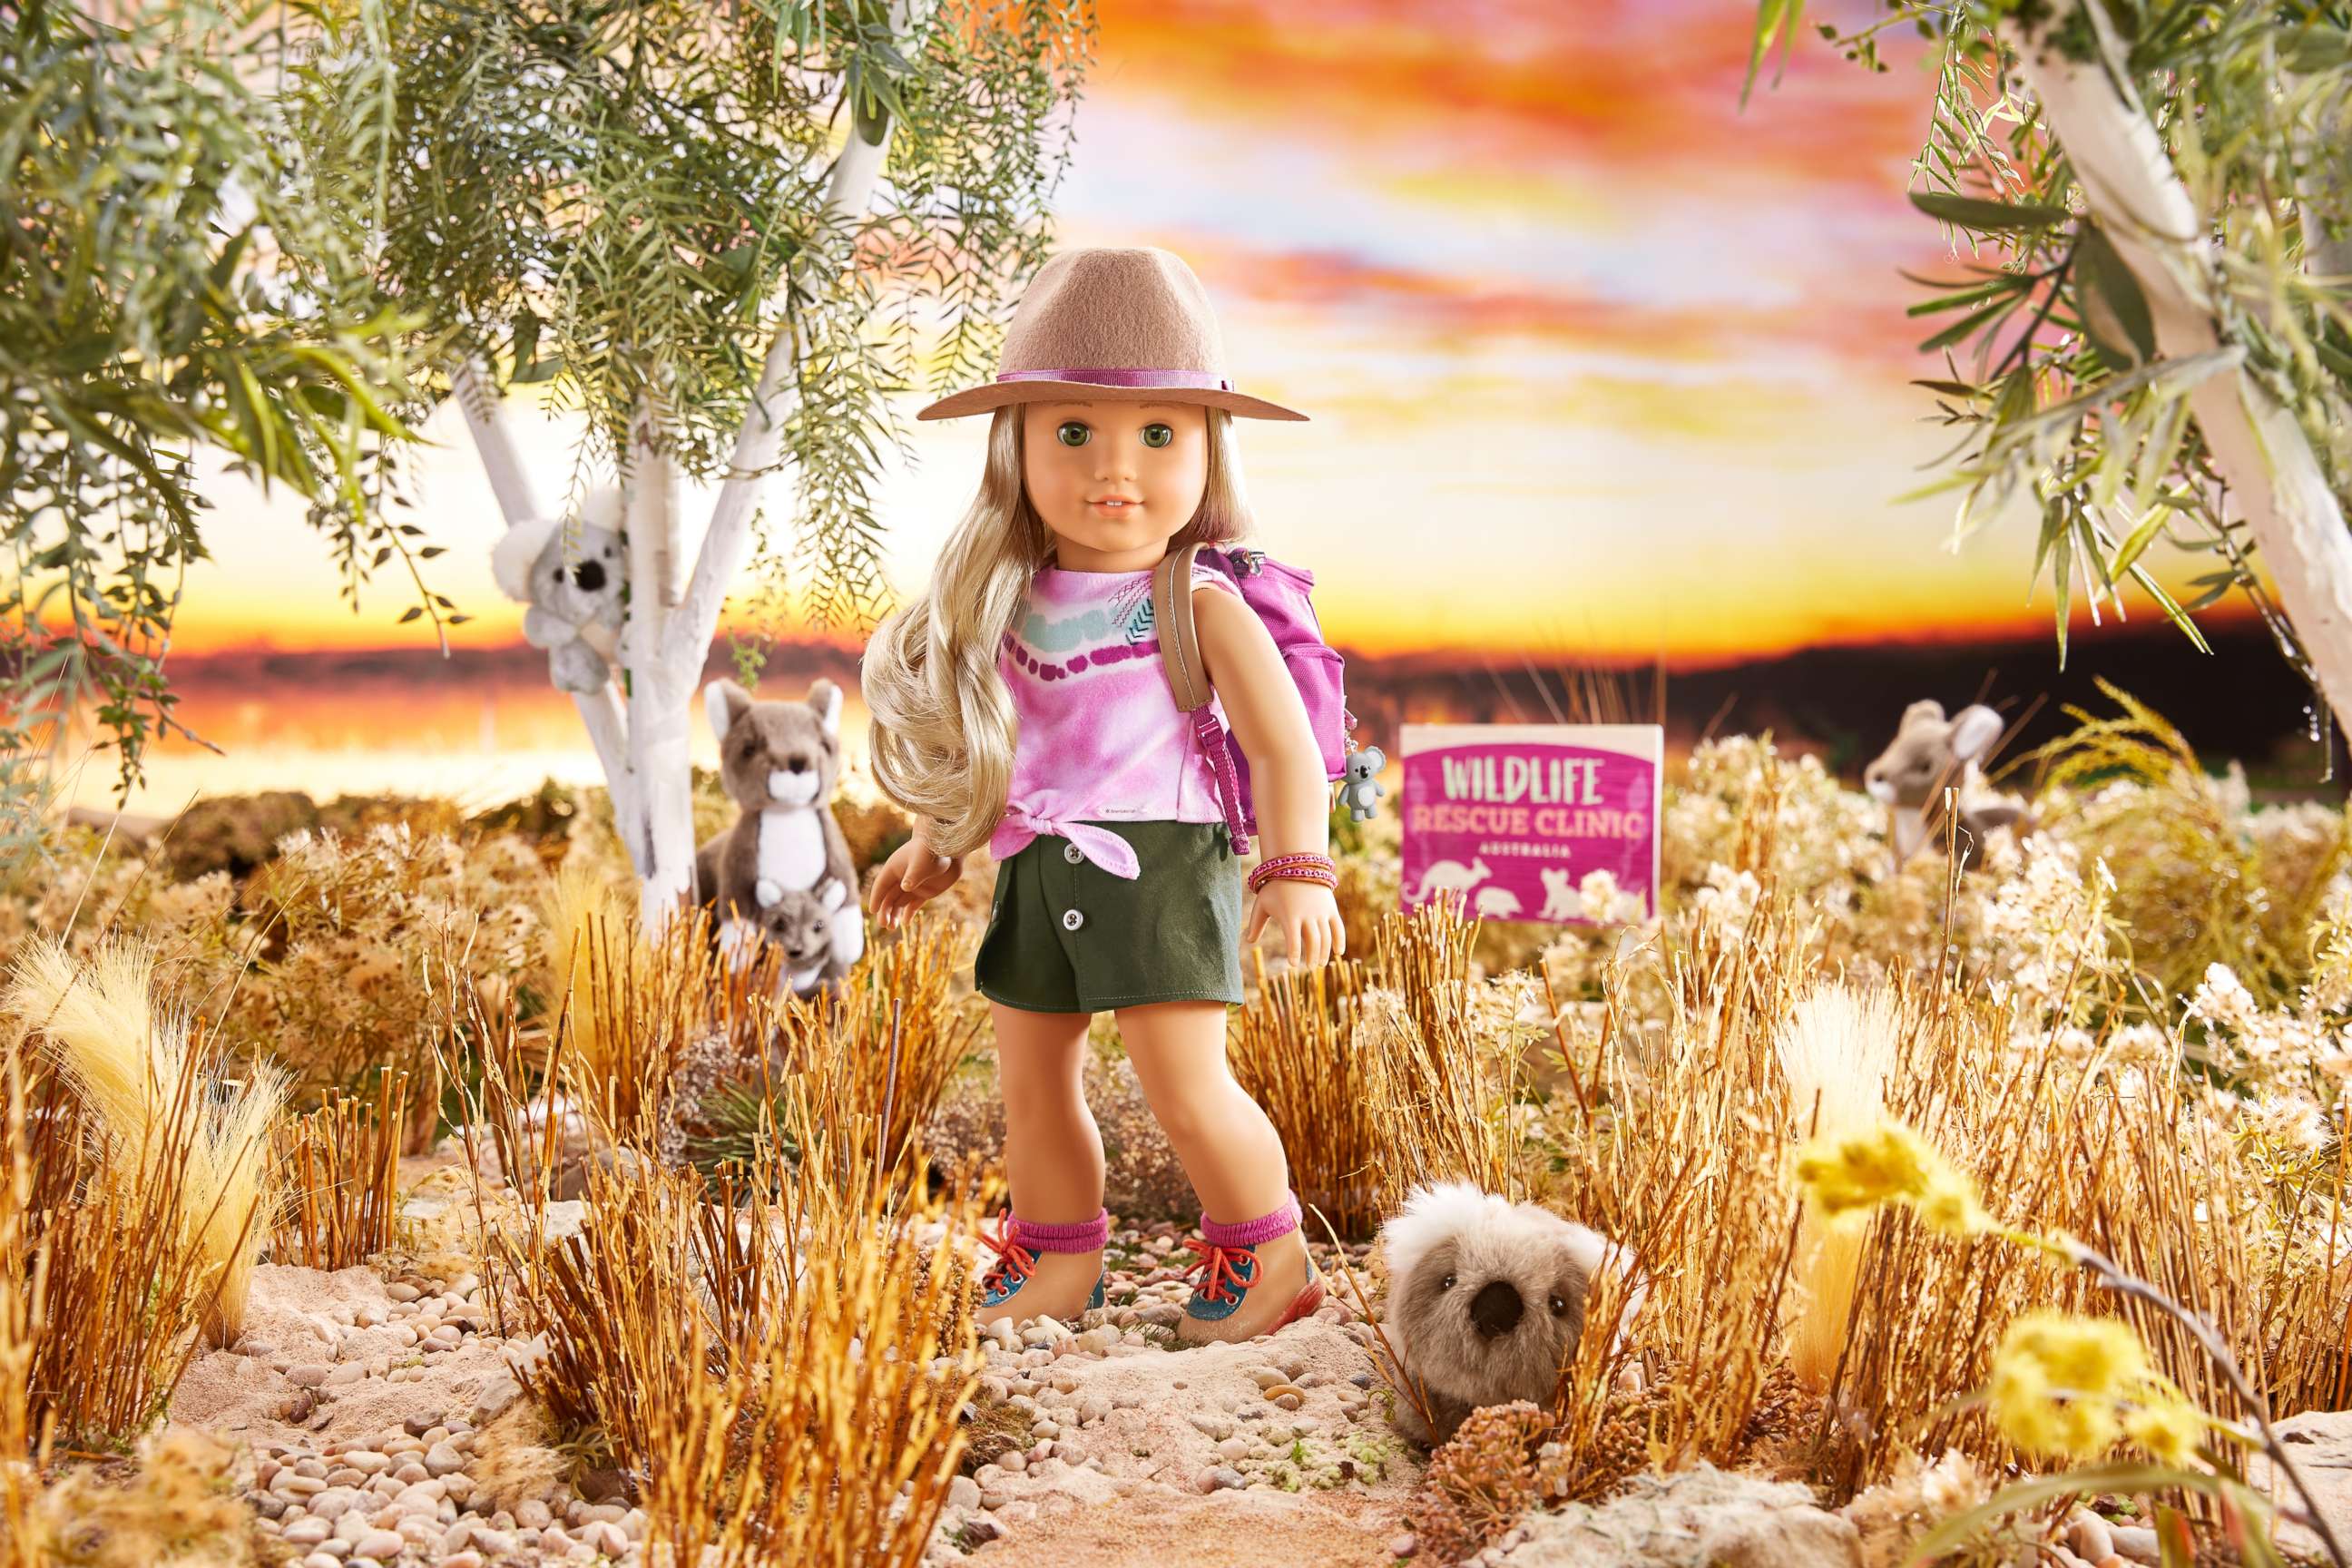 American Girls 2021 Doll Of The Year Is Wildlife Conservationist Kira Bailey Abc News